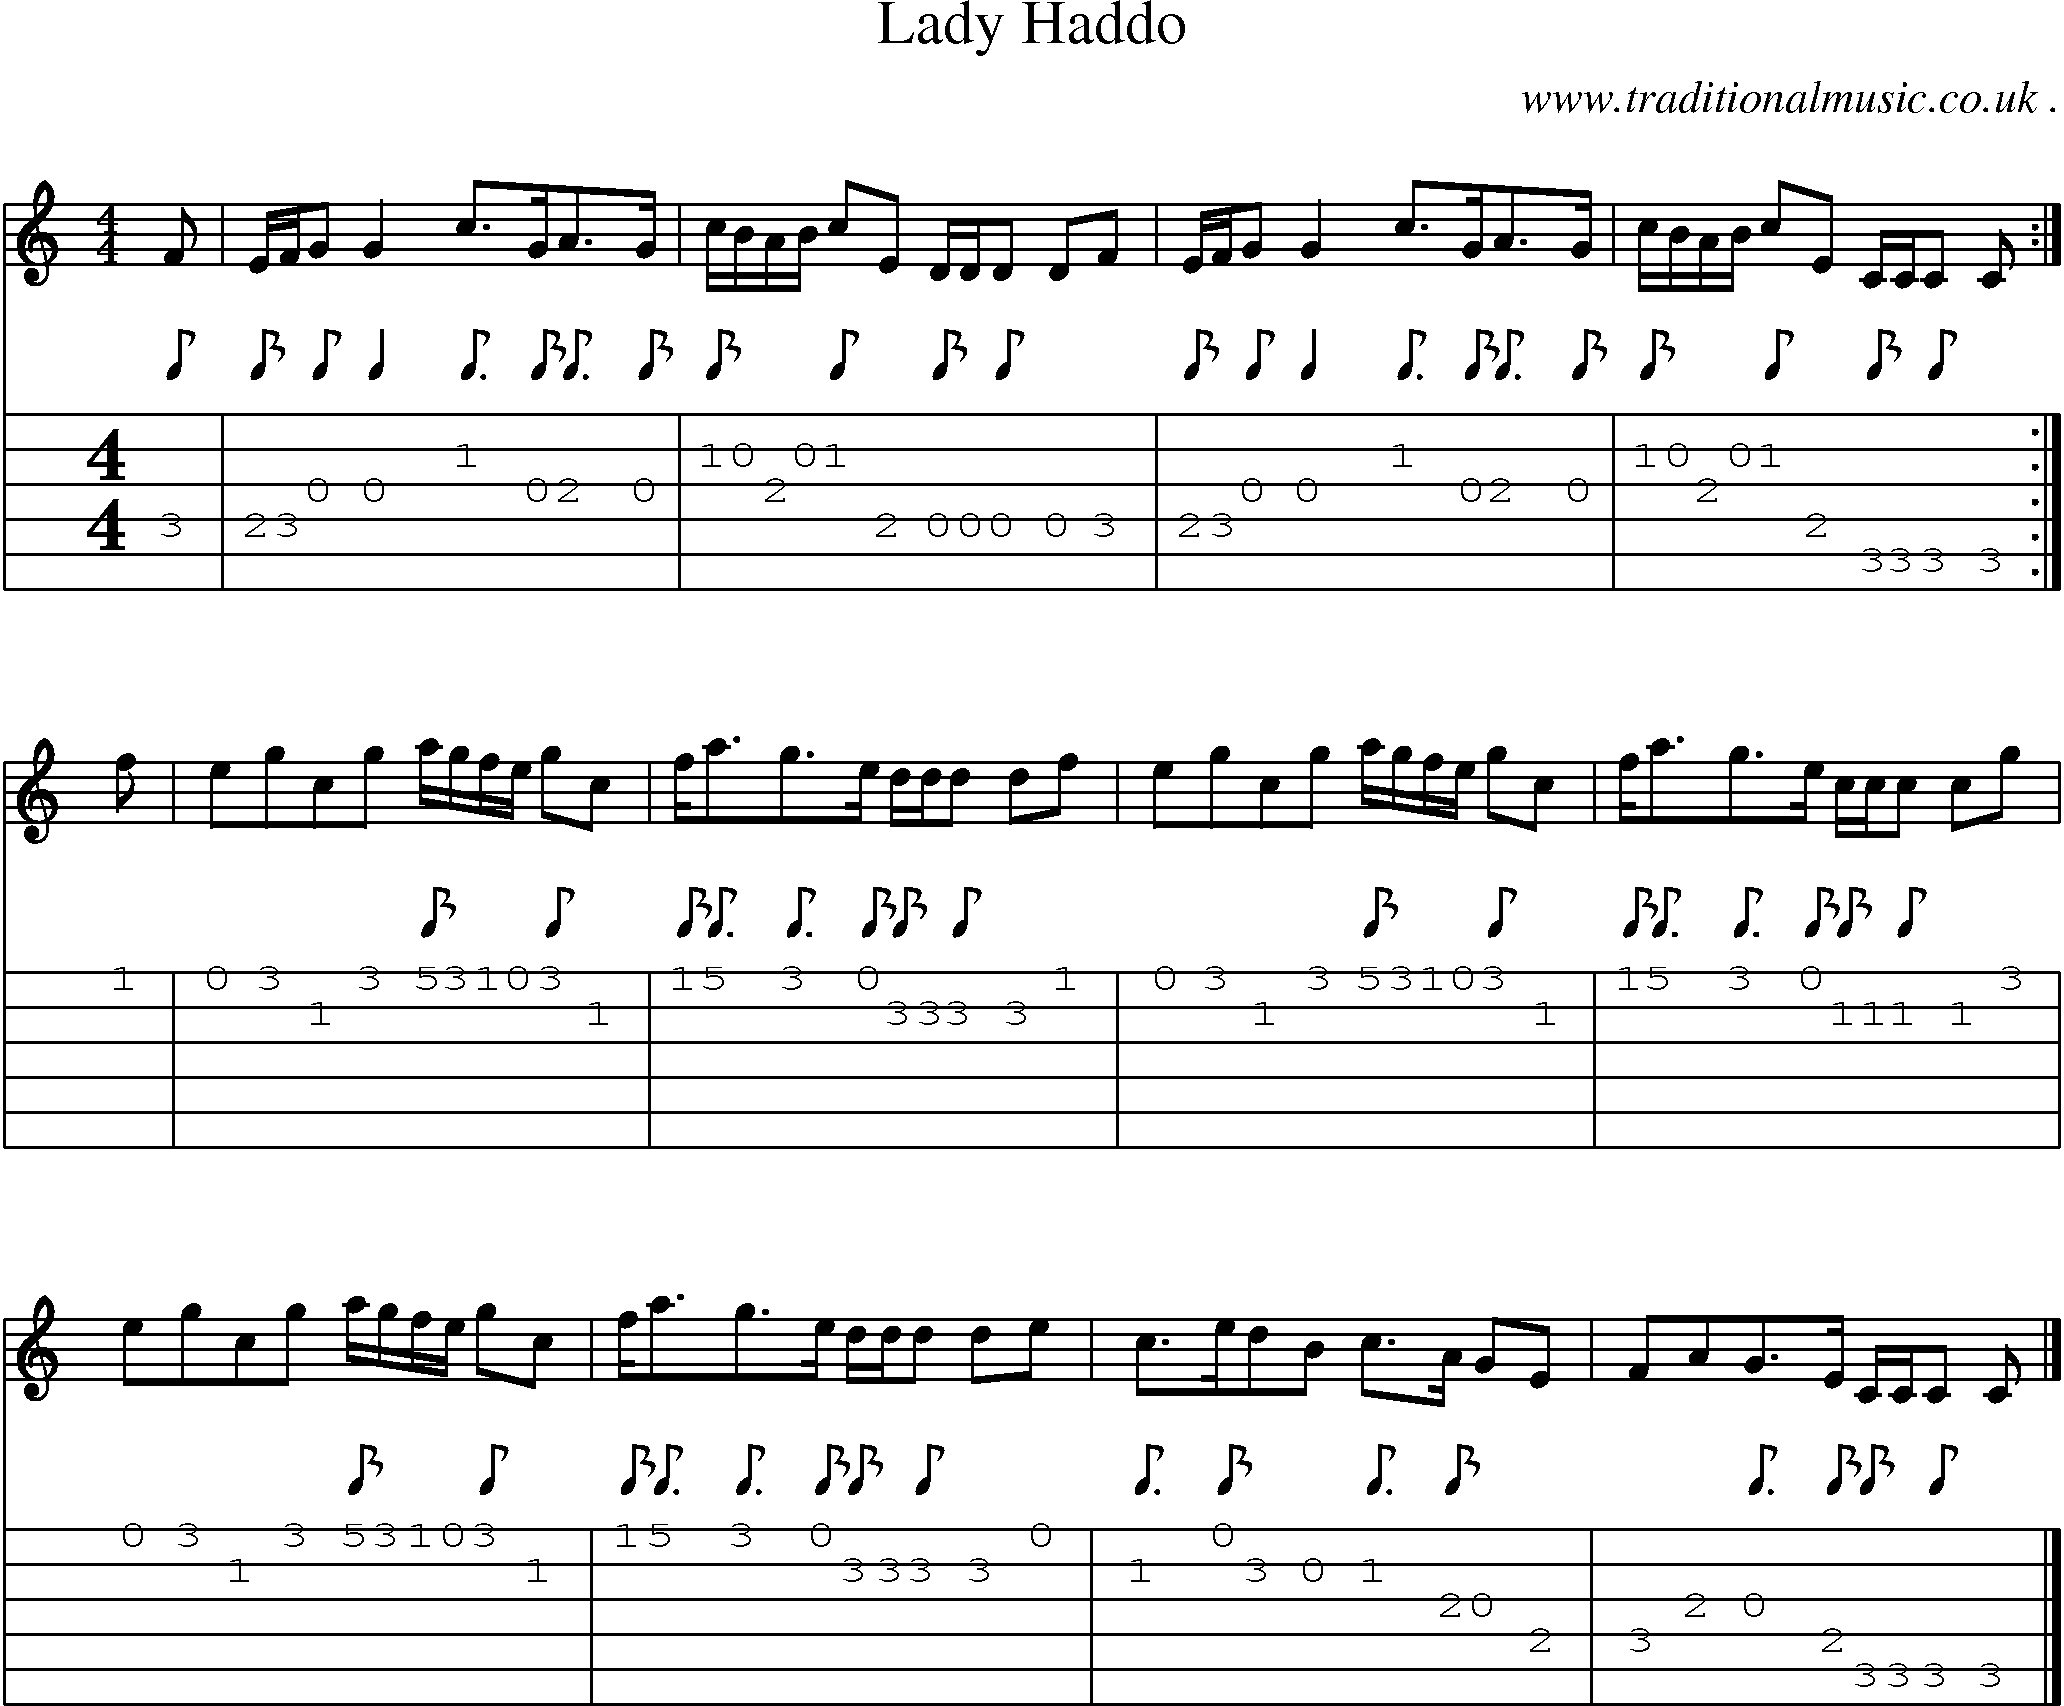 Sheet-music  score, Chords and Guitar Tabs for Lady Haddo